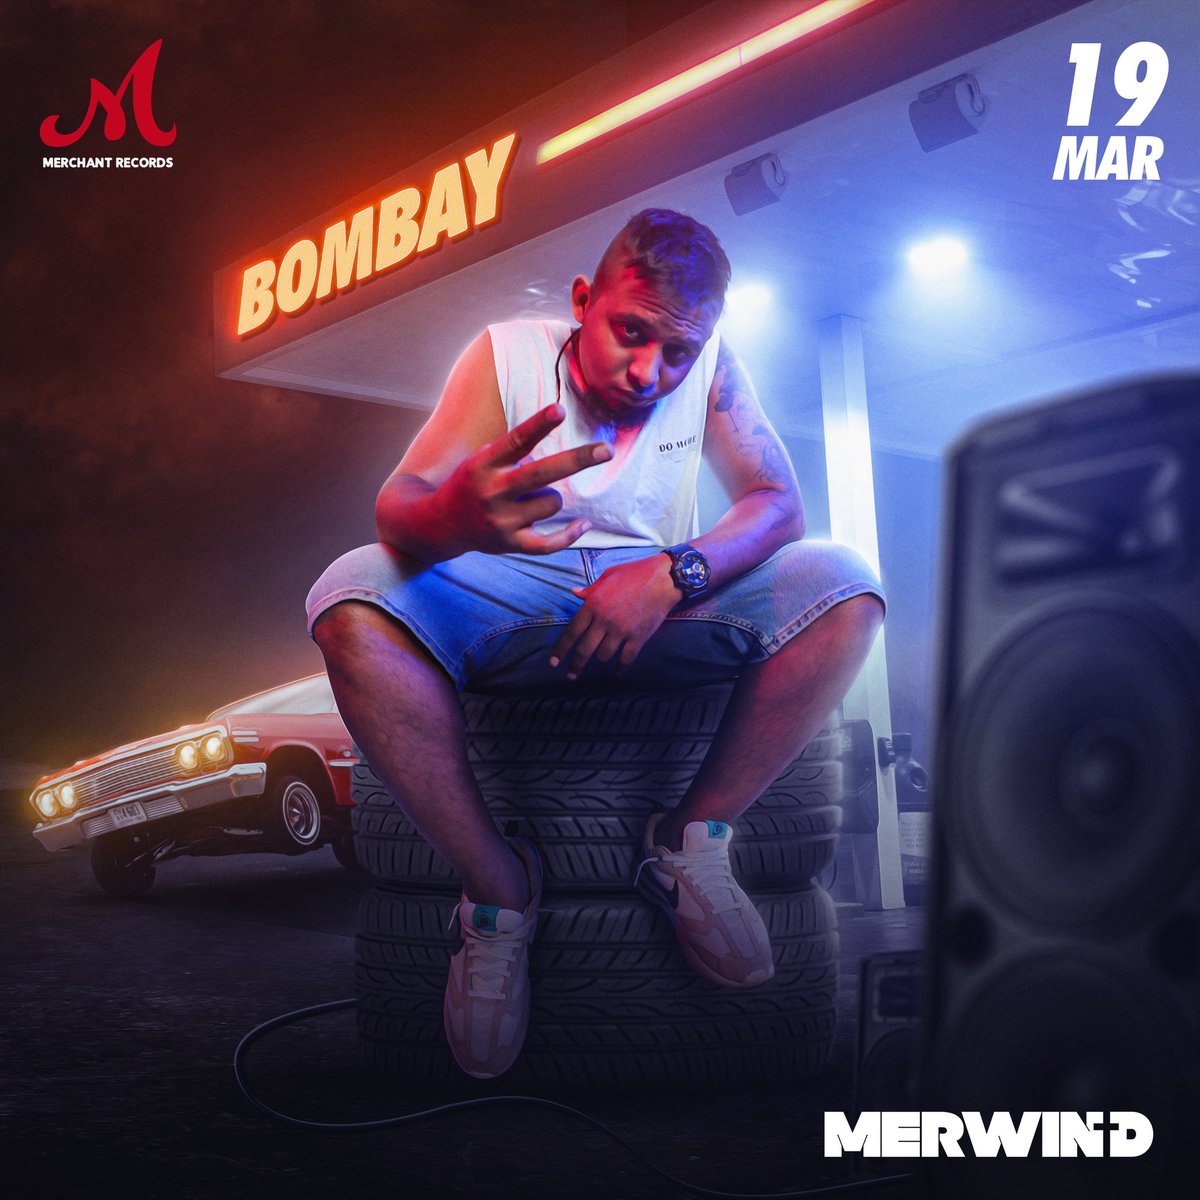 Experience the raw energy of the streets with #Bombay! Dropping March 19th on @salimsulaimanmusic's YouTube and all audio platforms. Don't miss @merwin_d & @anna_santiago.95 in action! 🎶🌆 @MerchantRecords @SlimSulaiman